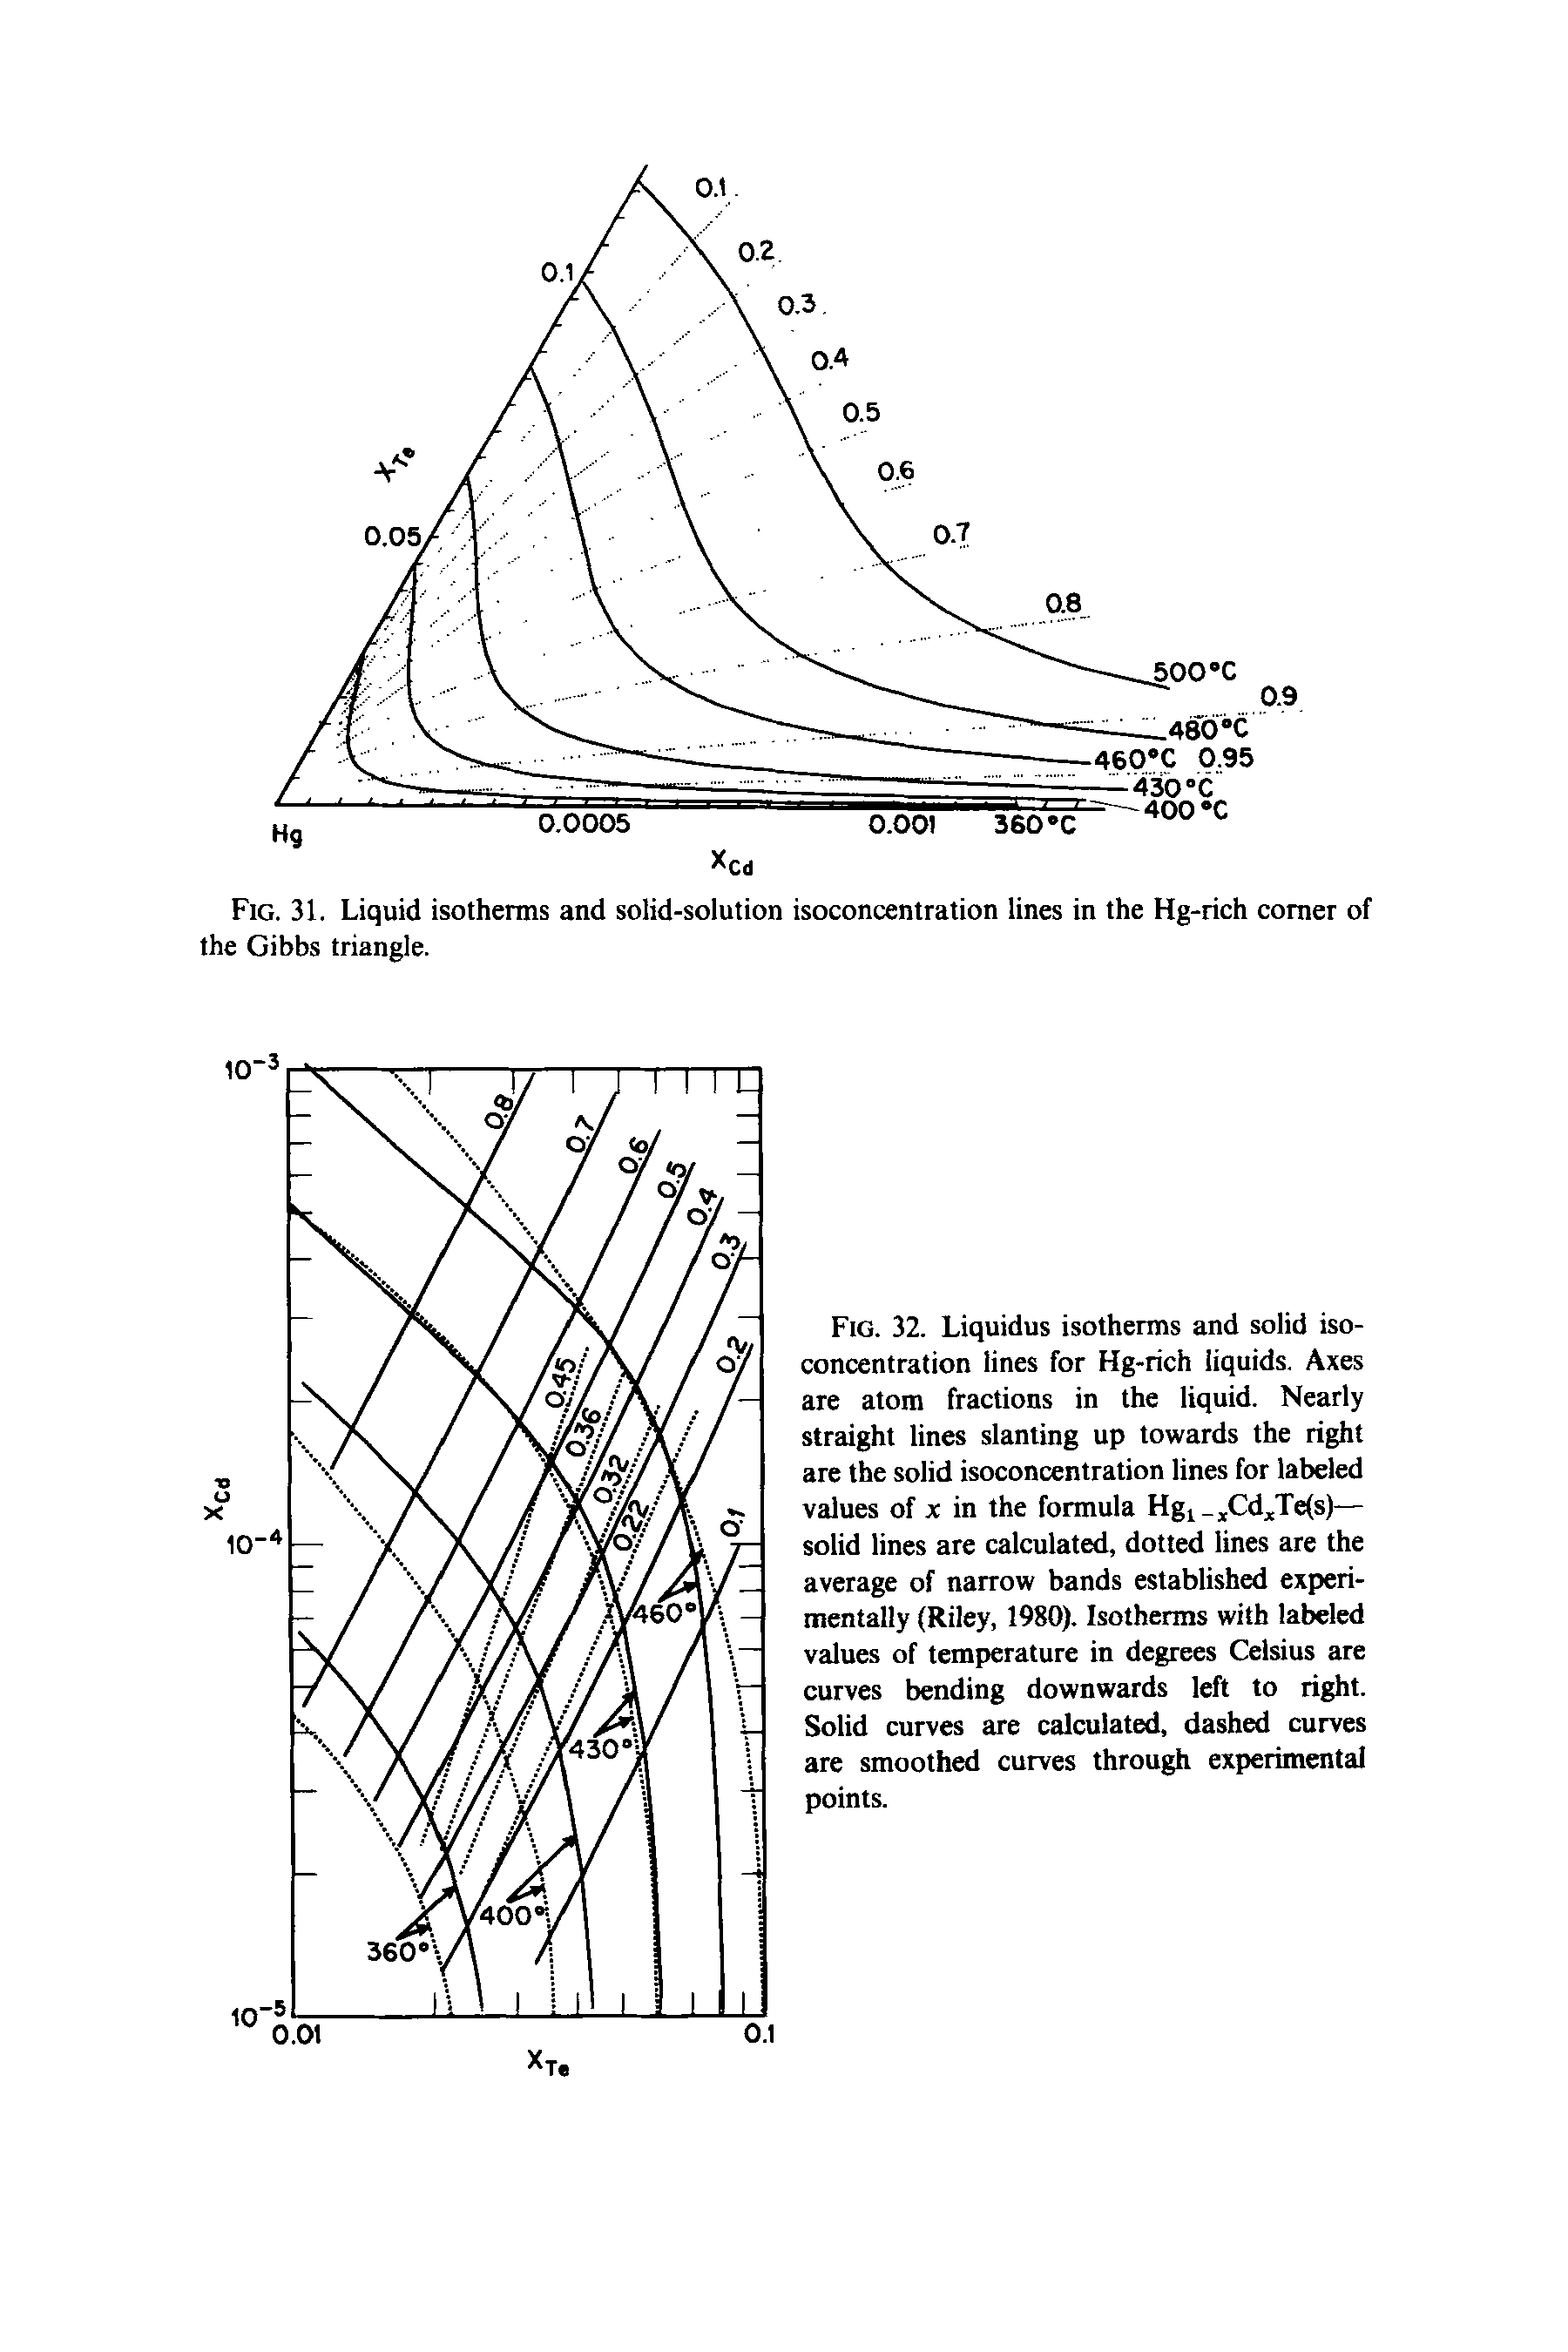 Fig. 31. Liquid isotherms and solid-solution isoconcentration lines in the Hg-rich corner of the Gibbs triangle.